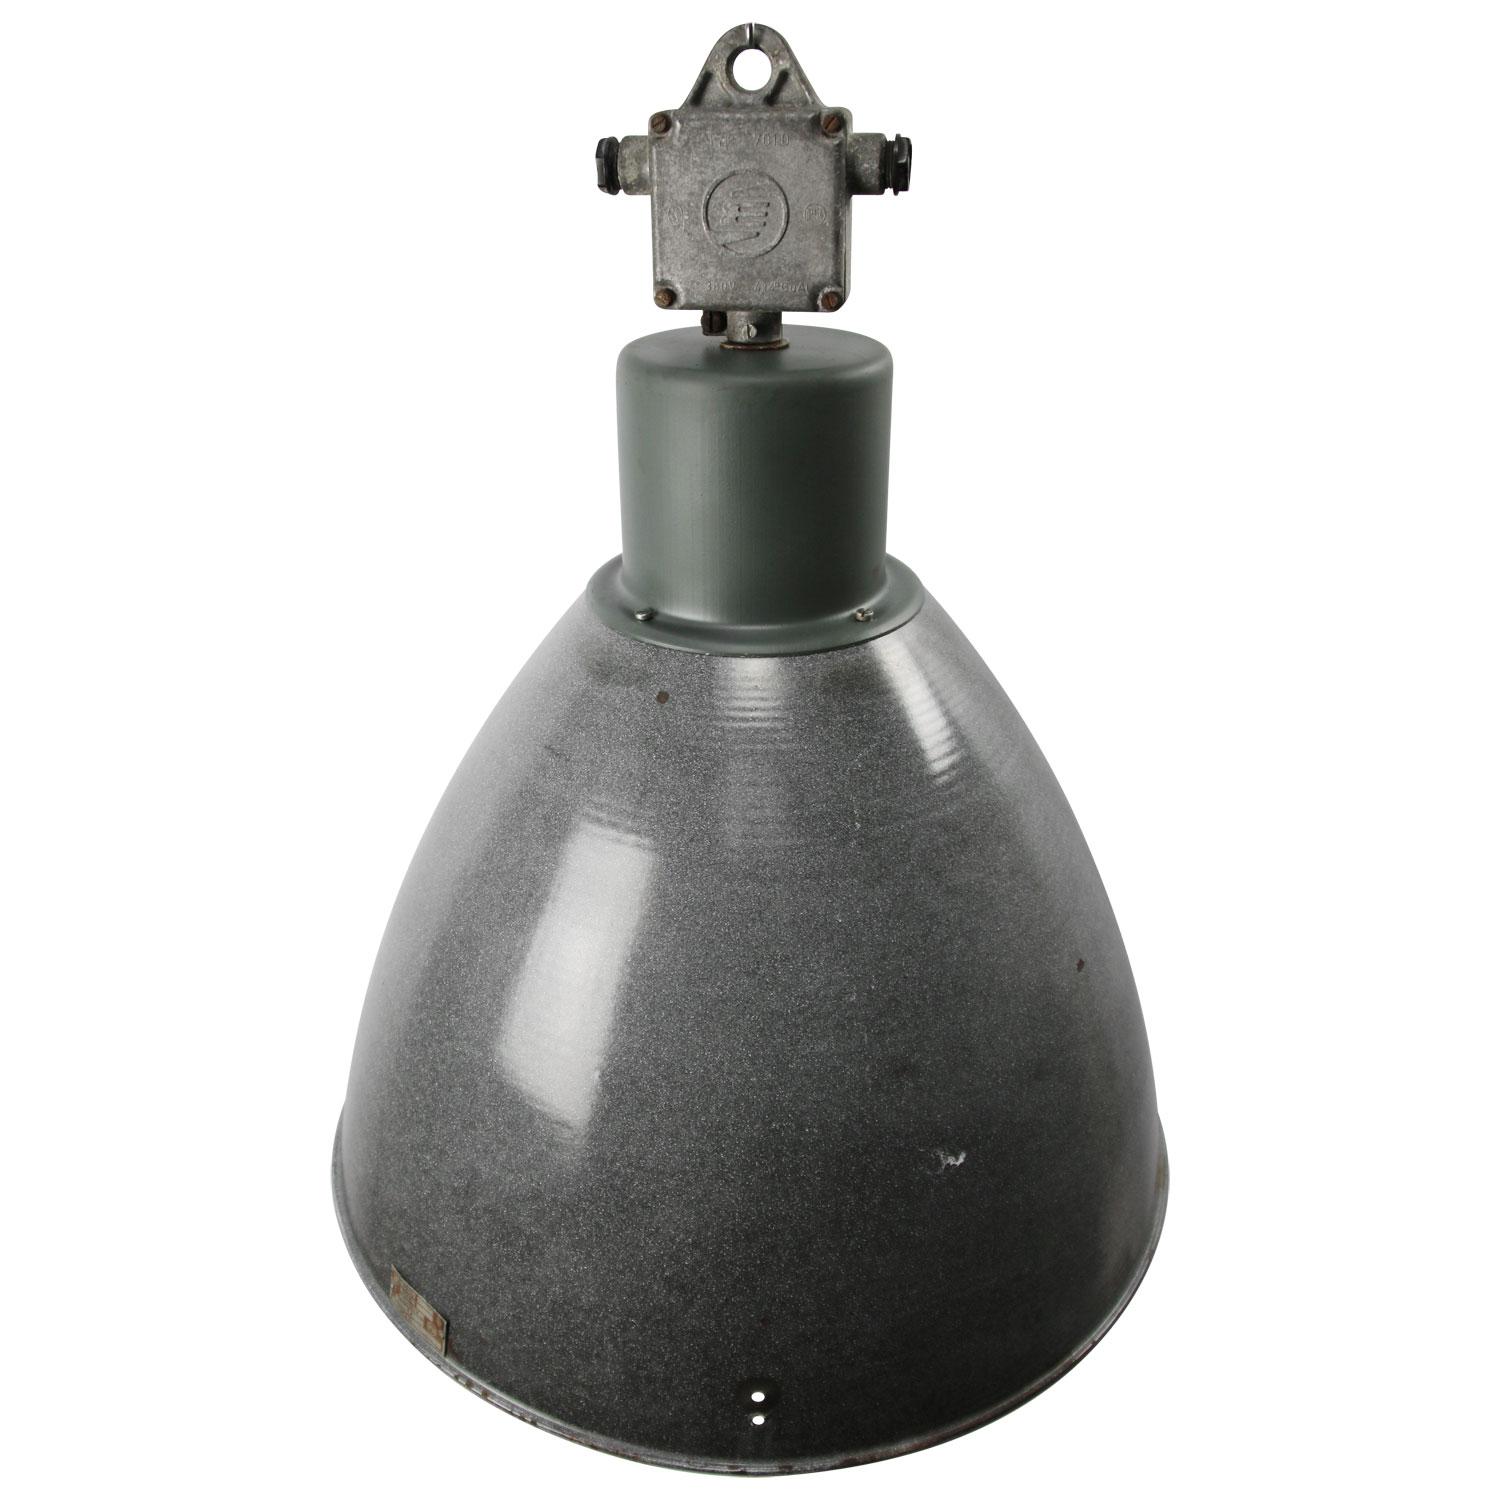 Industrial hanging lamp, dark gray enamel with white interior.
Cast aluminum top. 

Weight: 5.30 kg / 11.7 lb

Priced per individual item. All lamps have been made suitable by international standards for incandescent light bulbs,